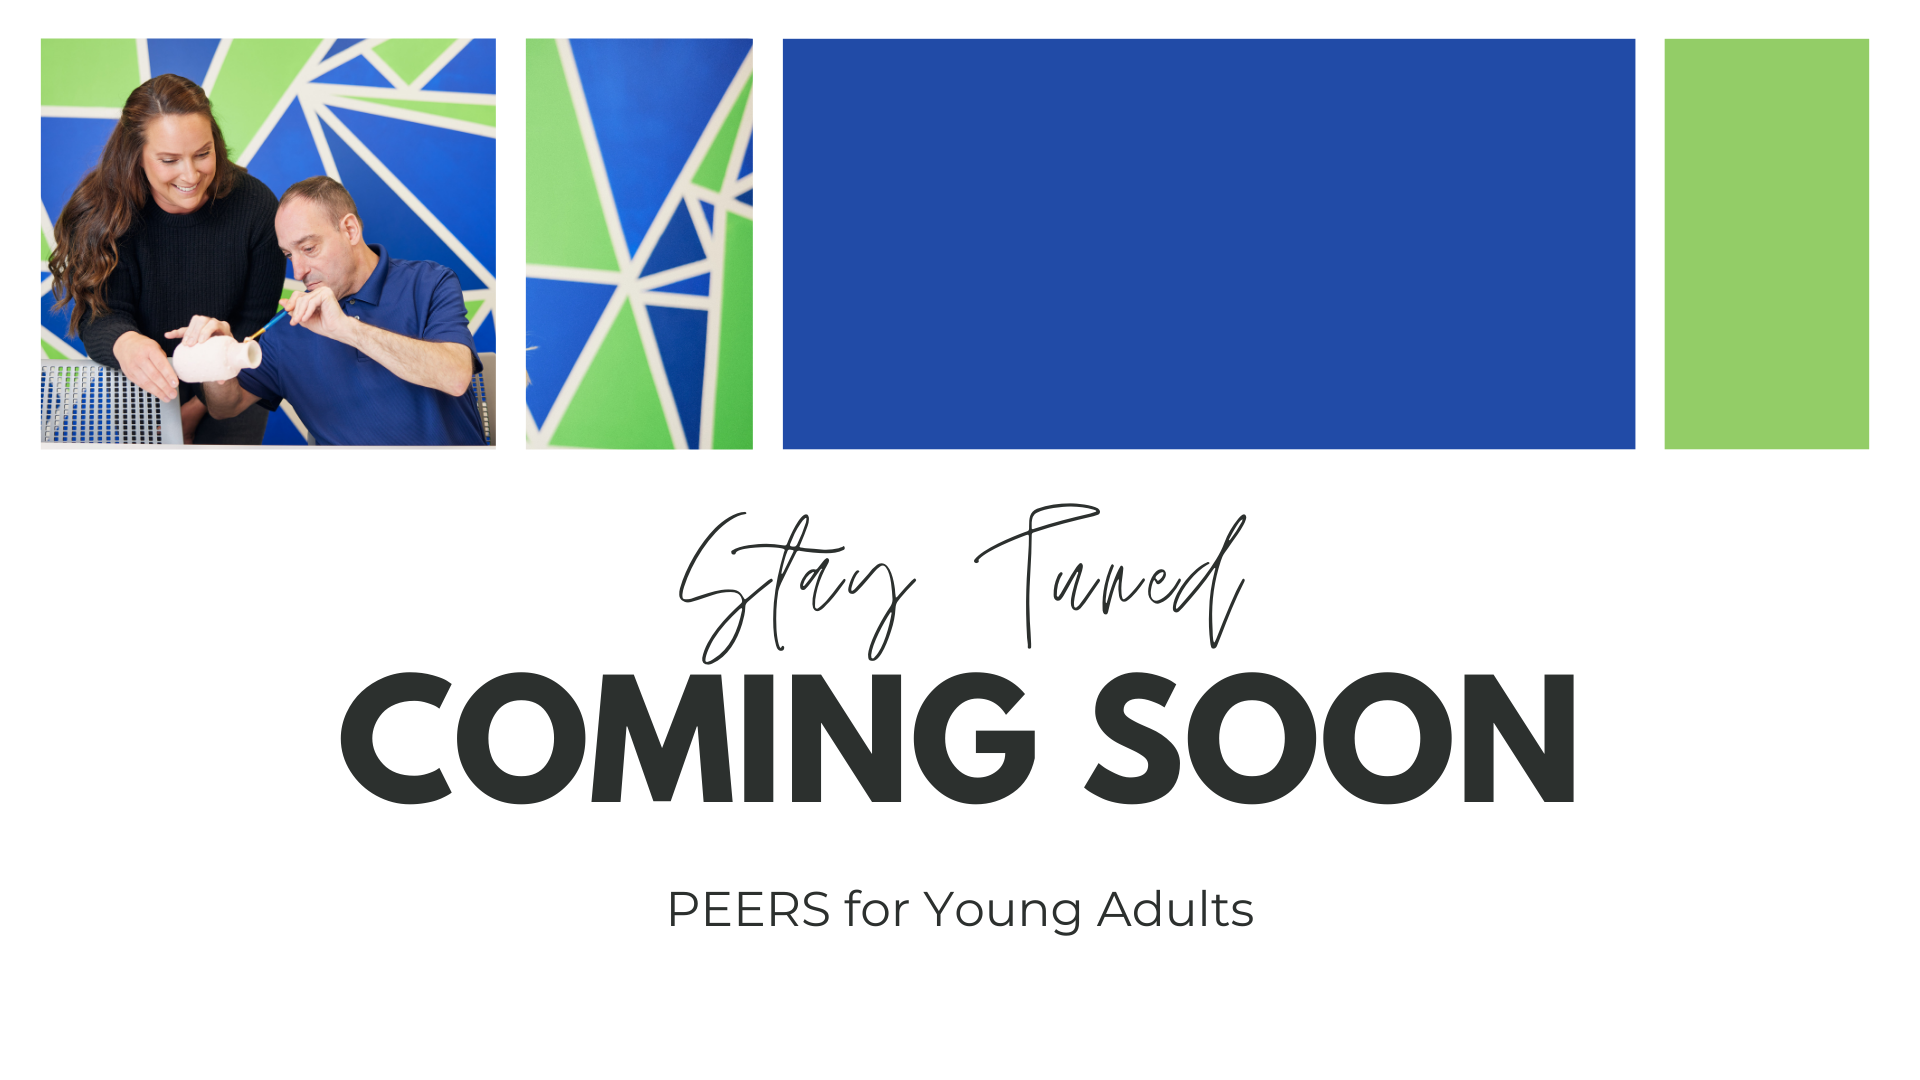 PEERS for Young Adults